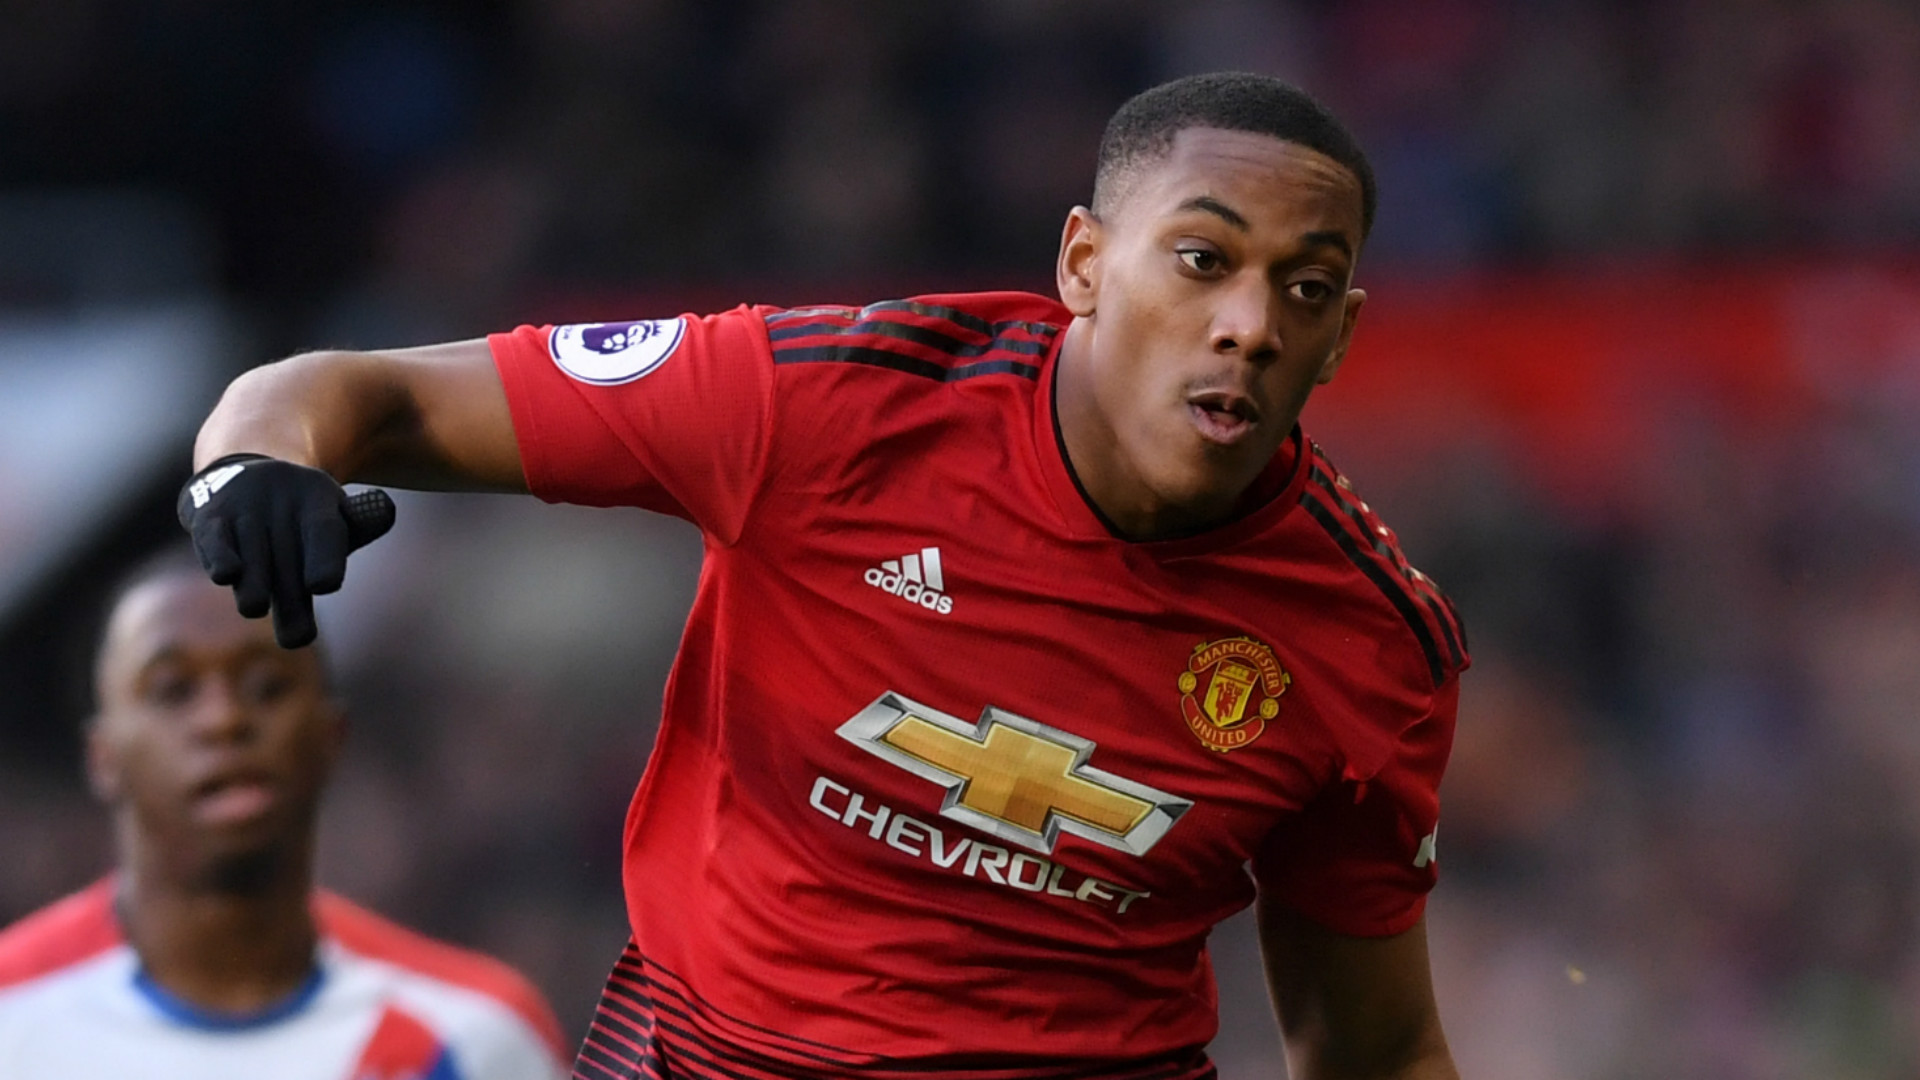 Man Utd injury news: Anthony Martial forced to withdraw from France